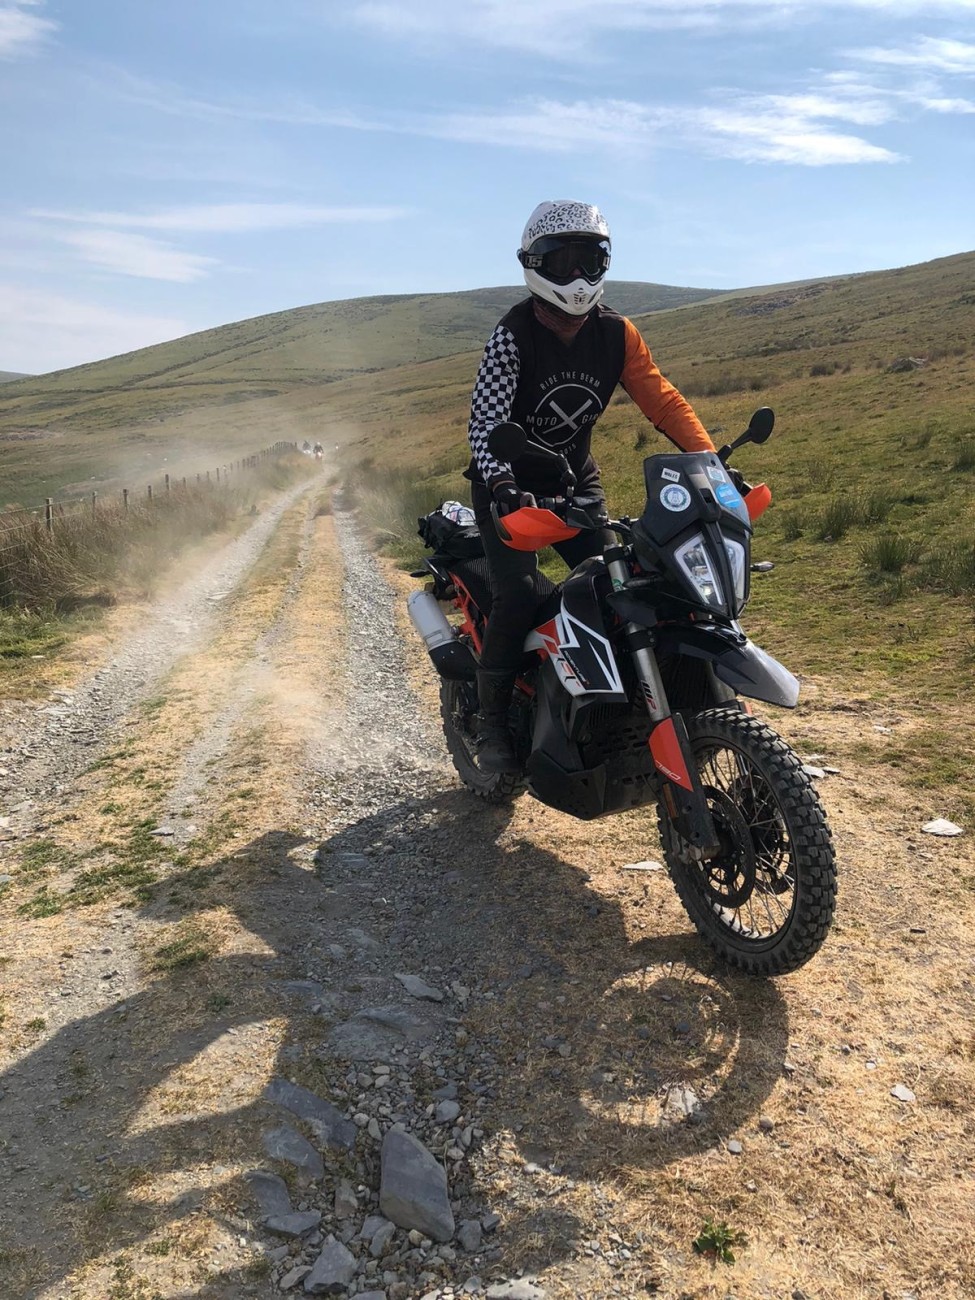 Rachel sat on her motorbike as she ascends a dirt track in Wales